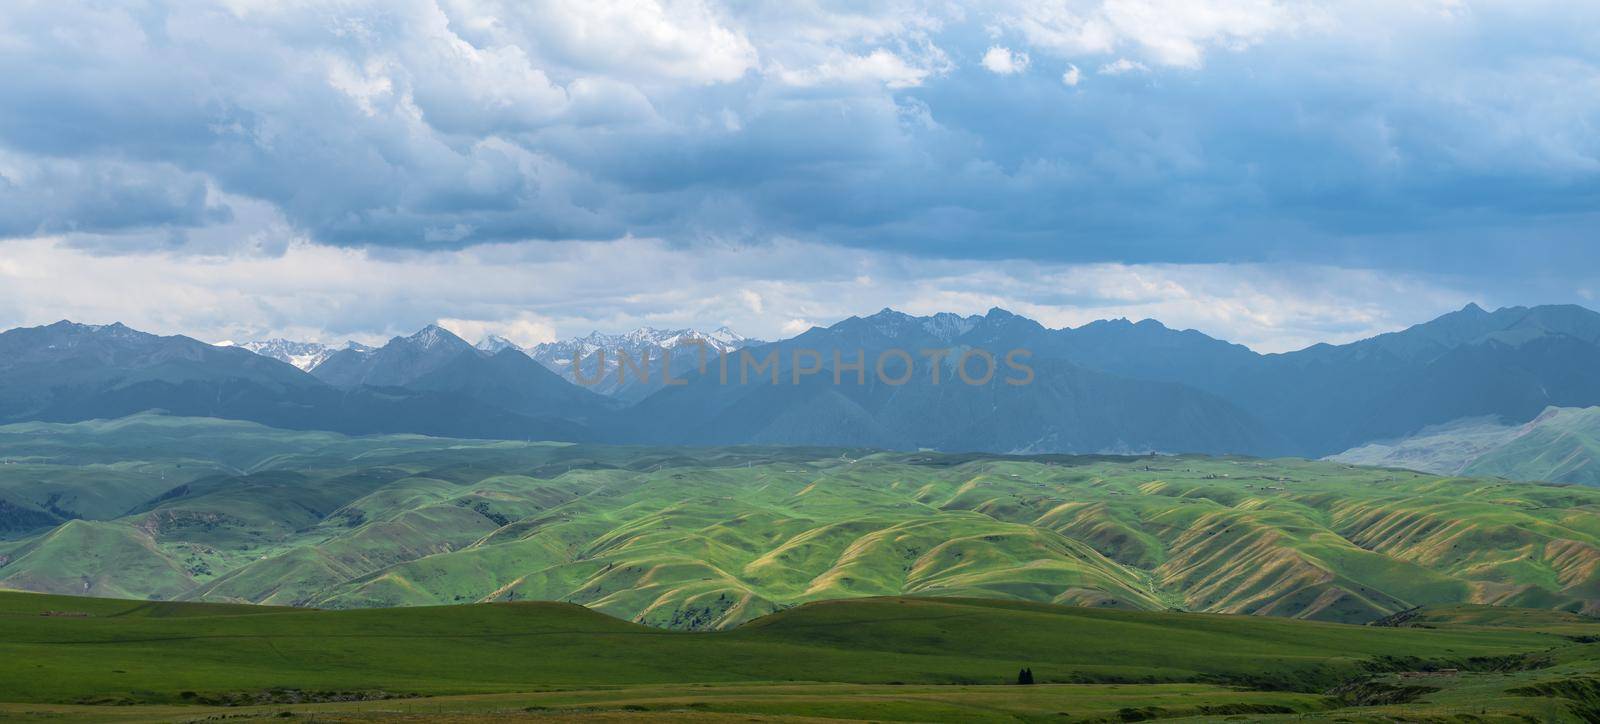 Grassland and mountains in a cloudy day. Photo in Kalajun grassland in Xinjiang, China. by vinkfan